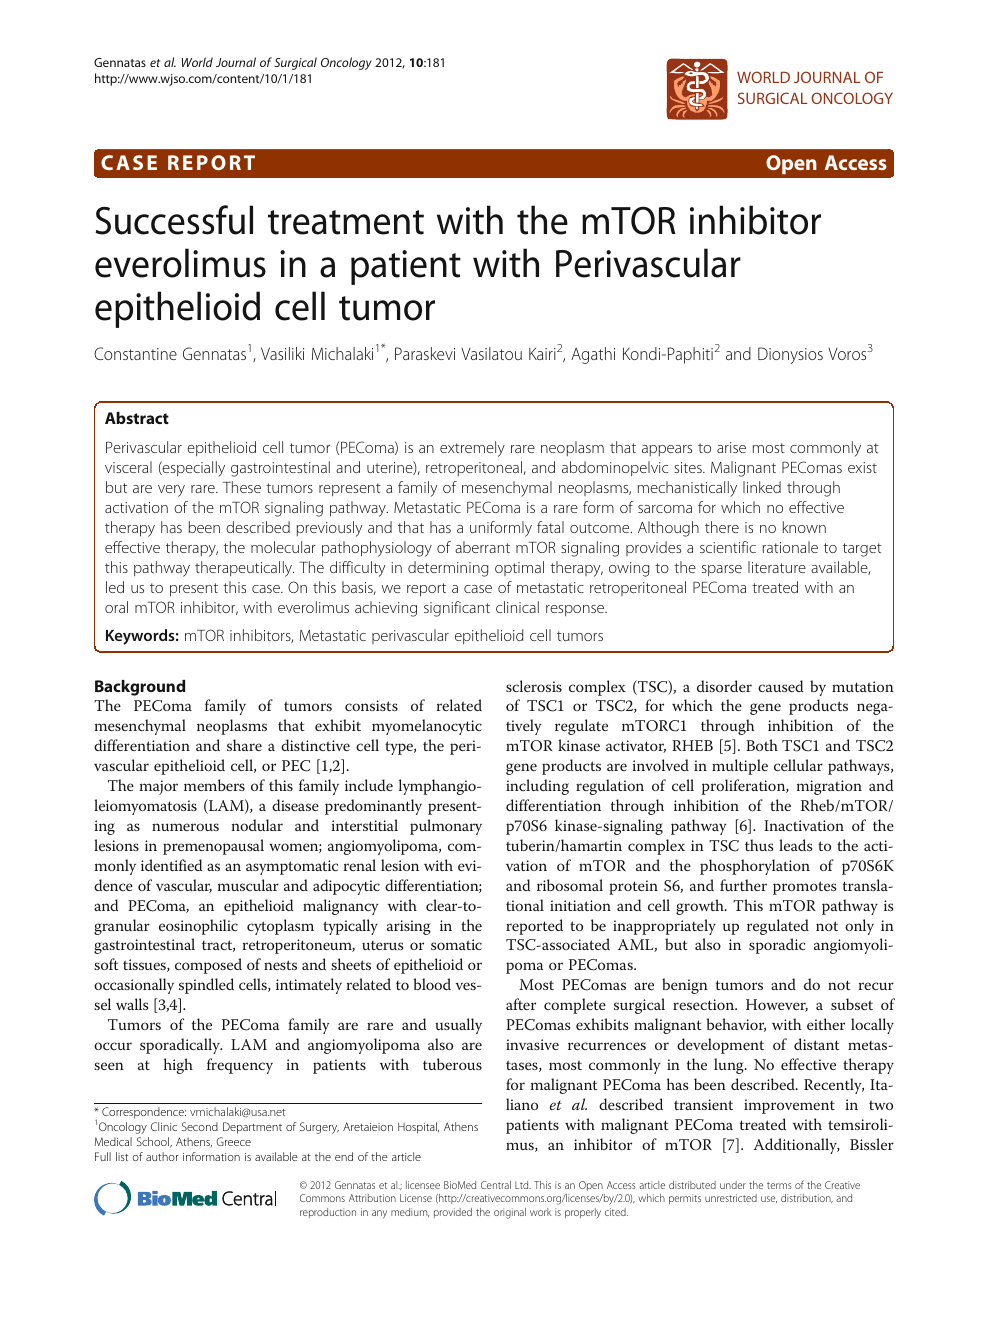 Successful treatment with the mTOR inhibitor everolimus in a